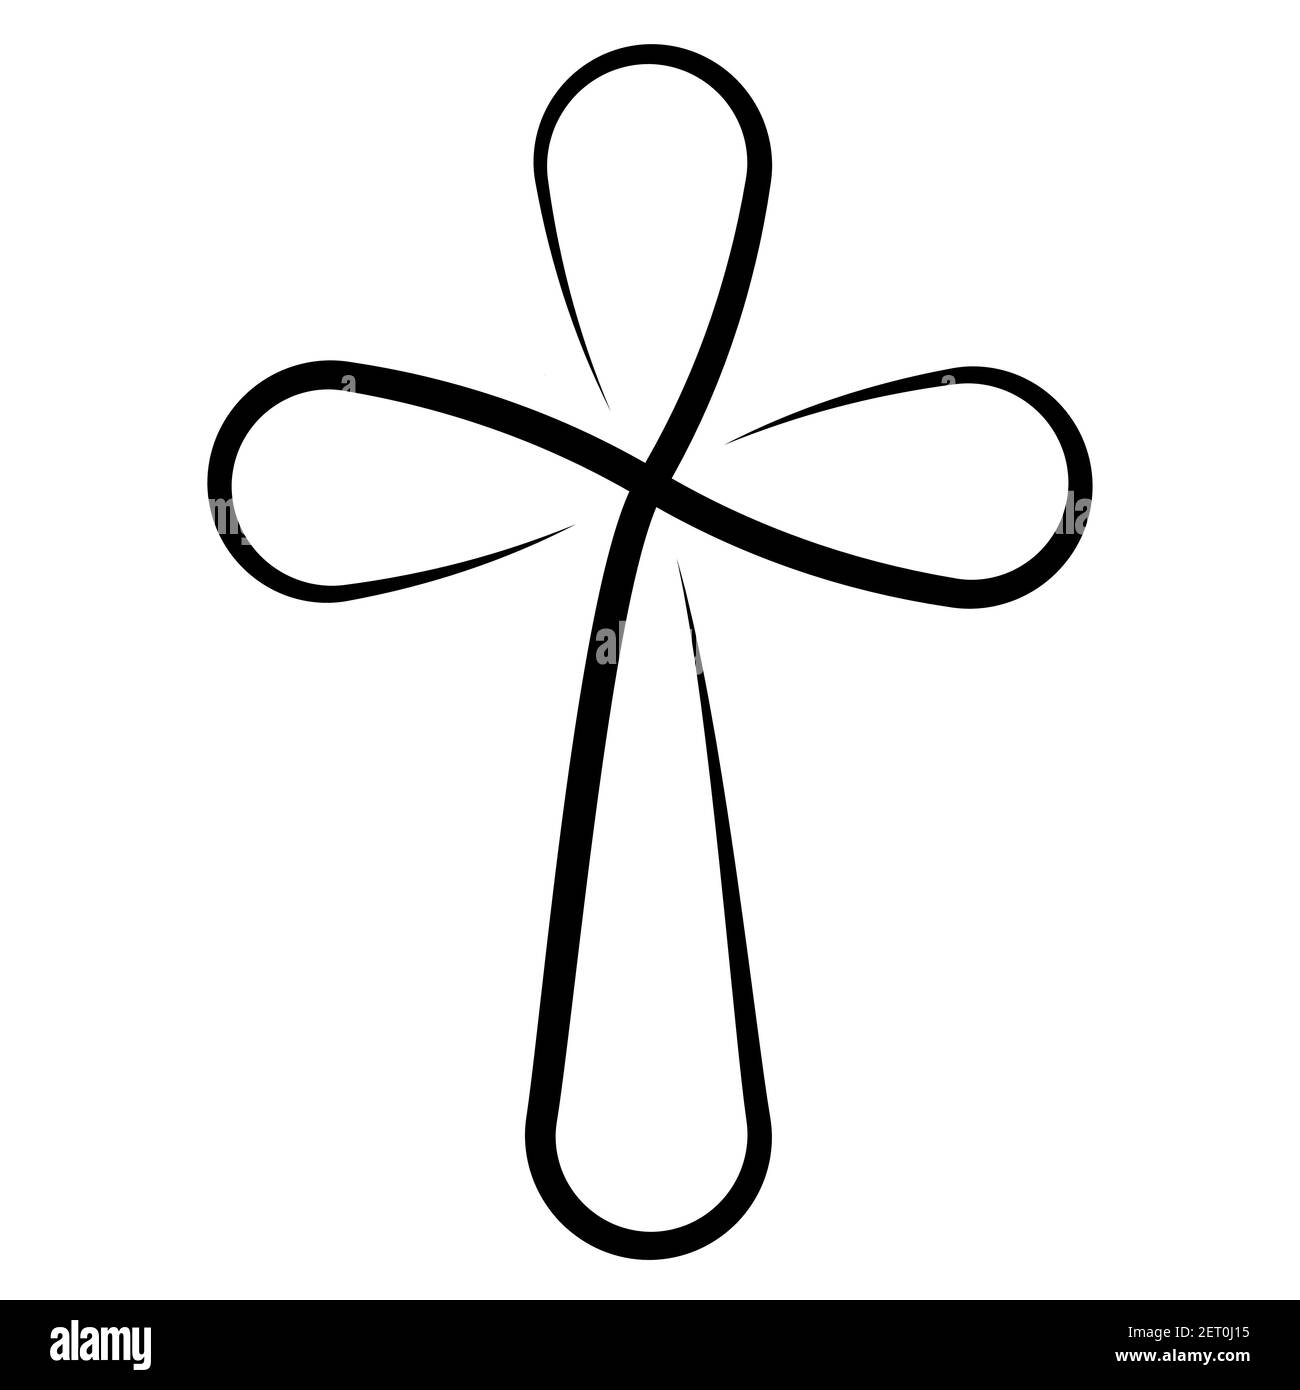 Cross tattoo Black and White Stock Photos & Images - Alamy